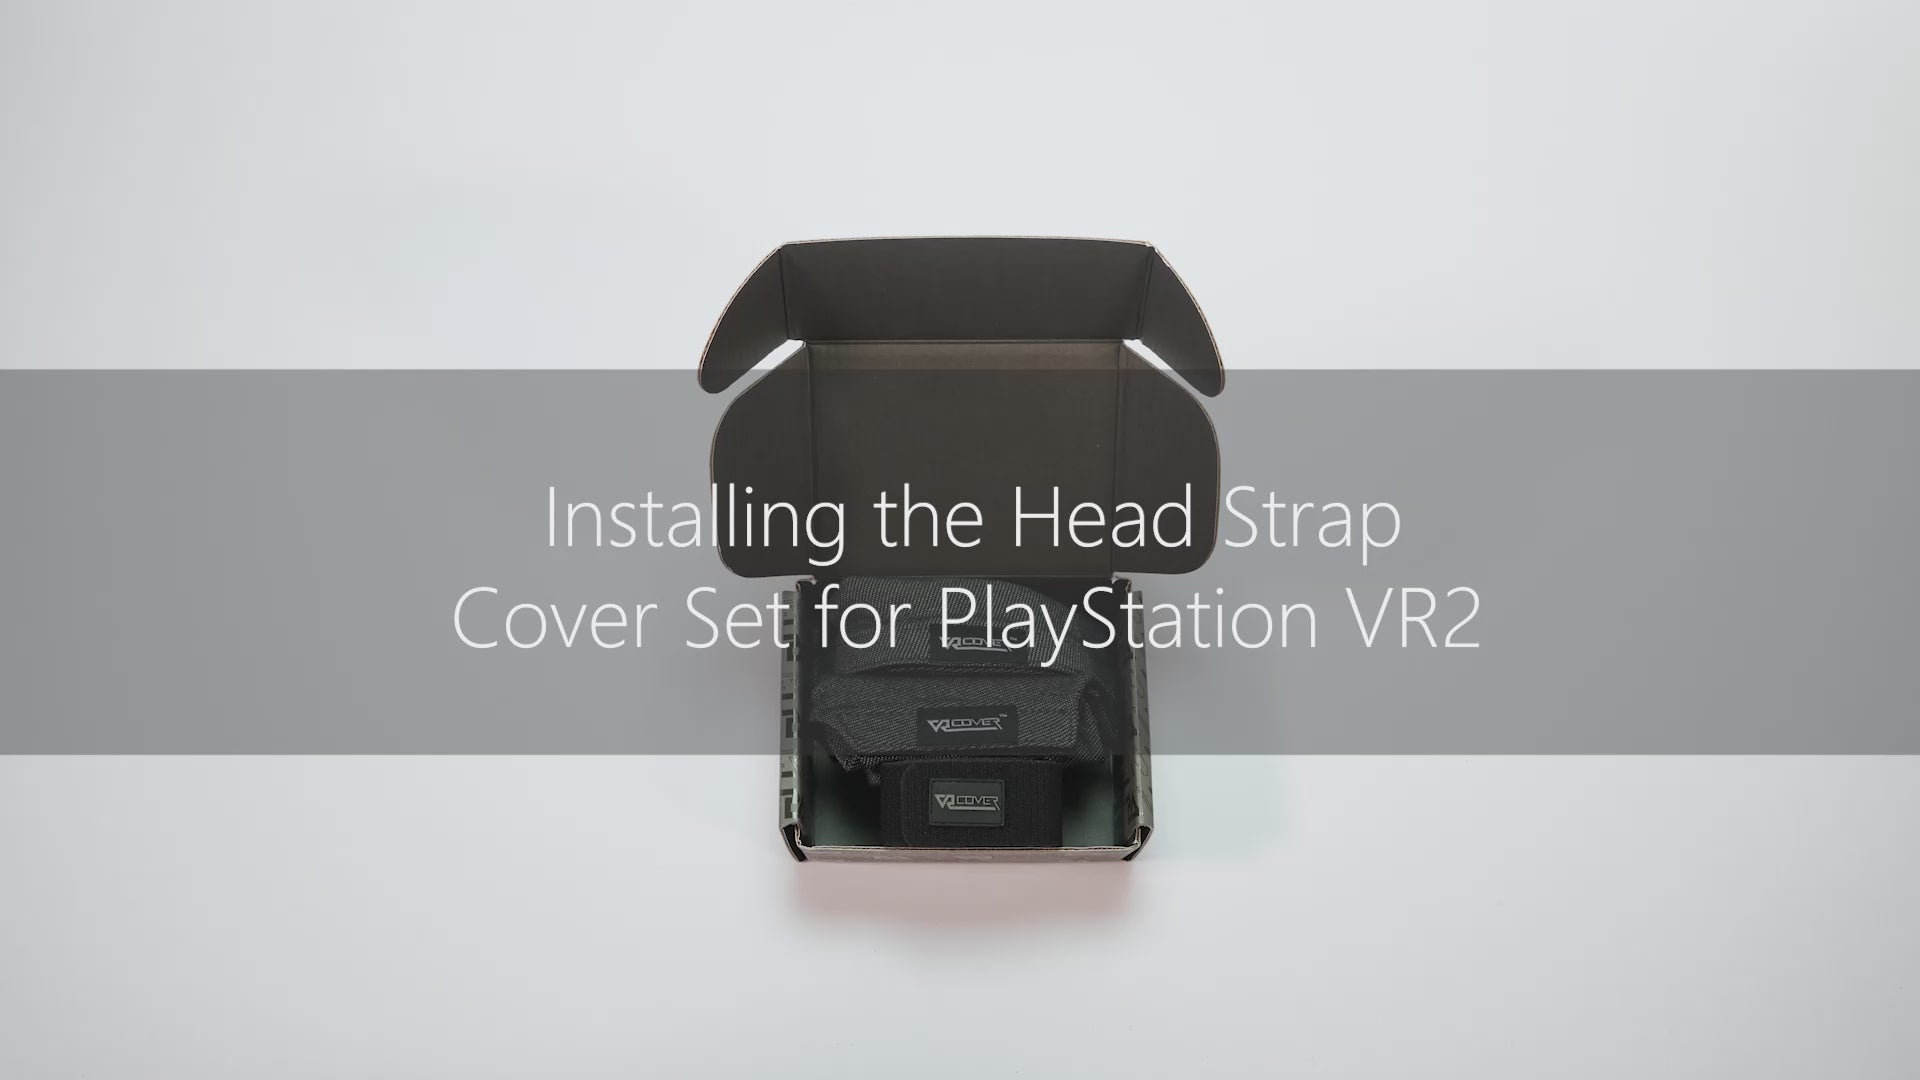 Hands on video for Head Strap Cover Set for PlayStation VR2